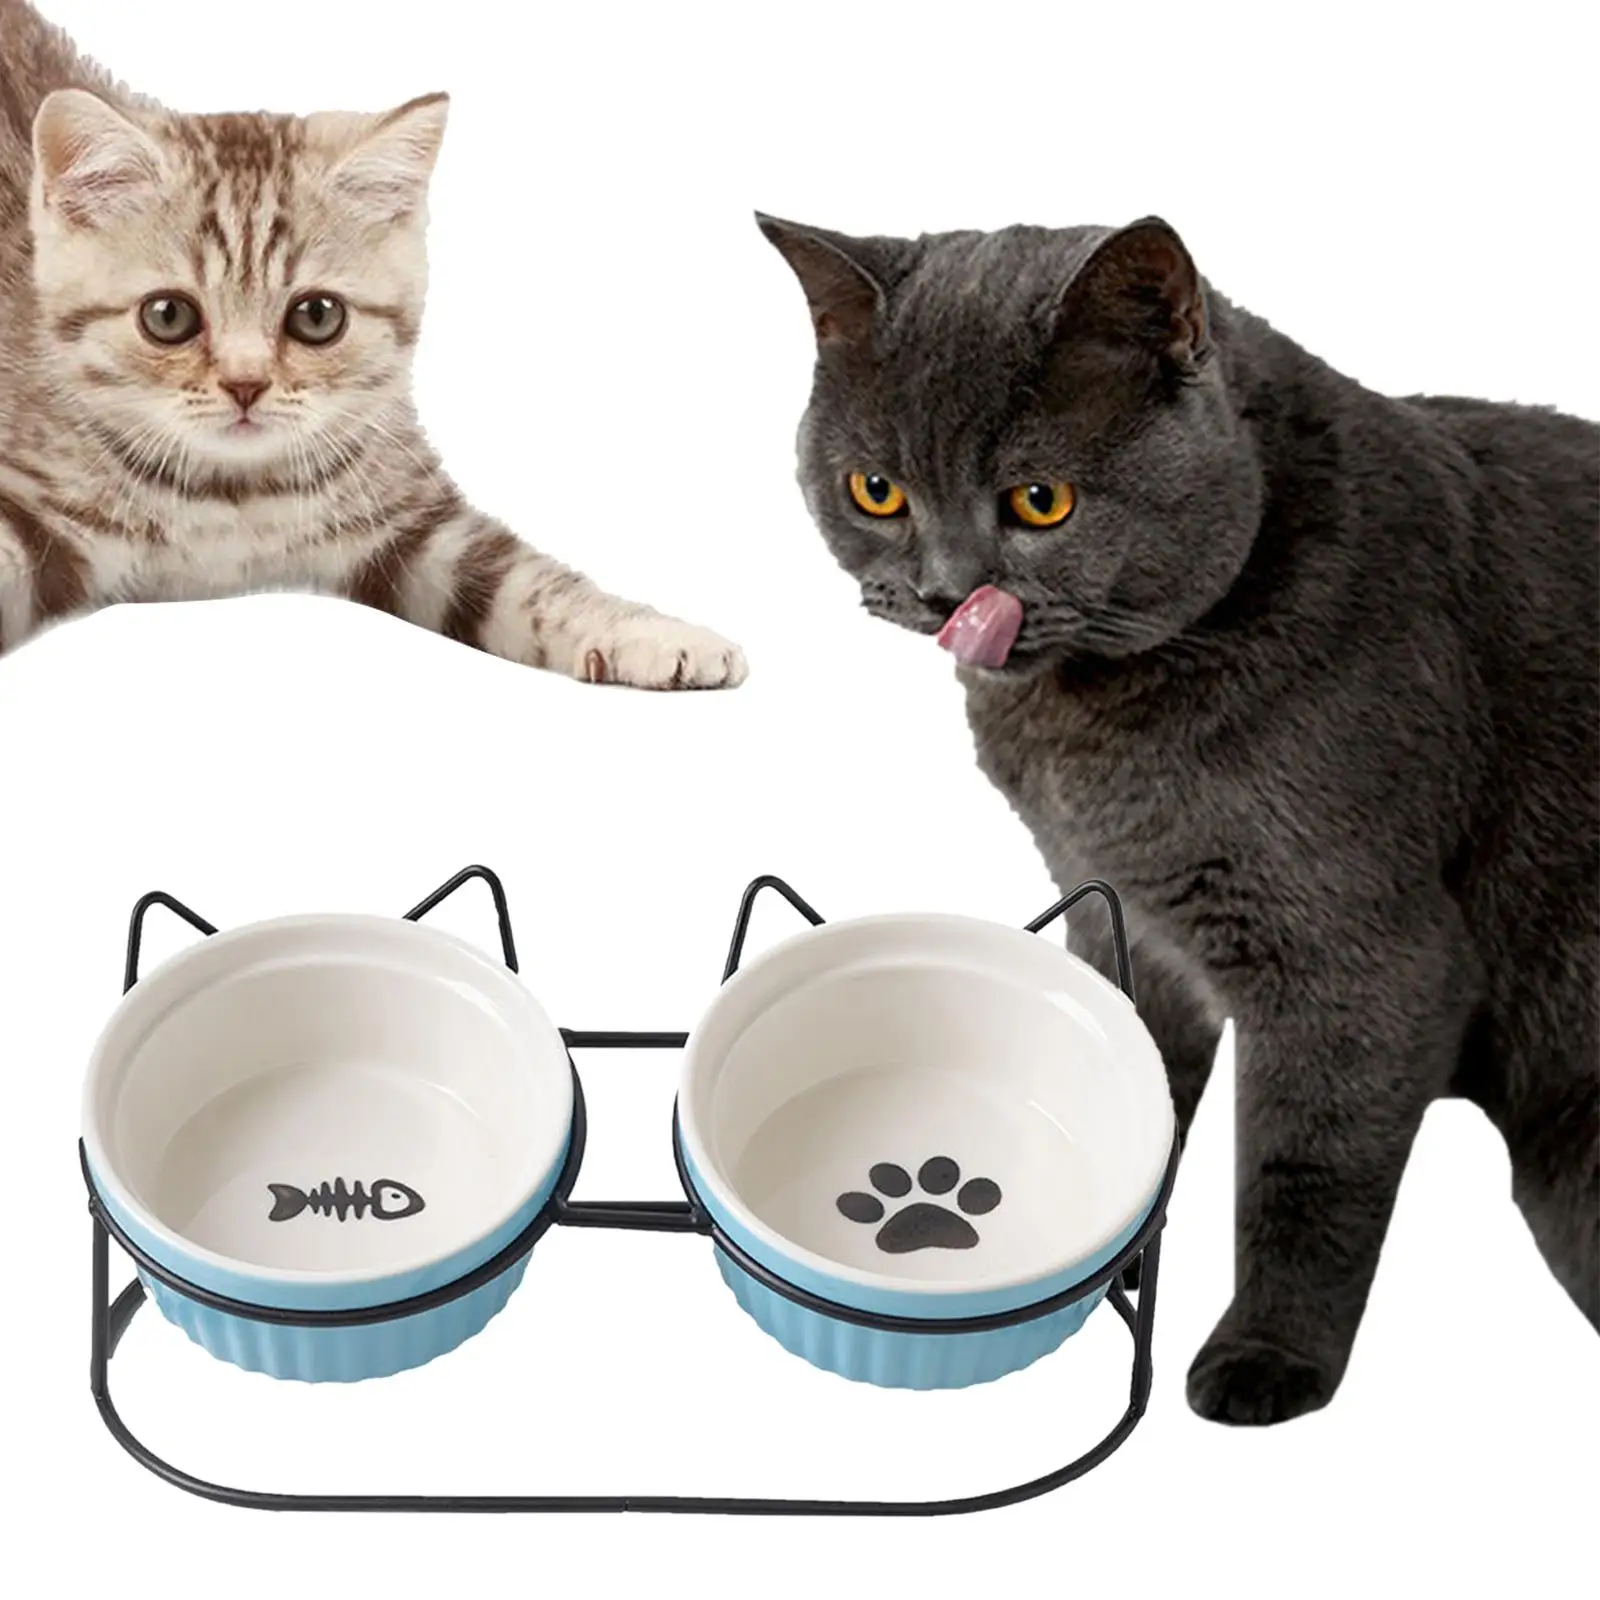 Retro Cat Bowls Raised Stand Neck Guard Stand Double Elevated for Pet Ceramic Bowl Double Dog Cat Food Feeding Bowls